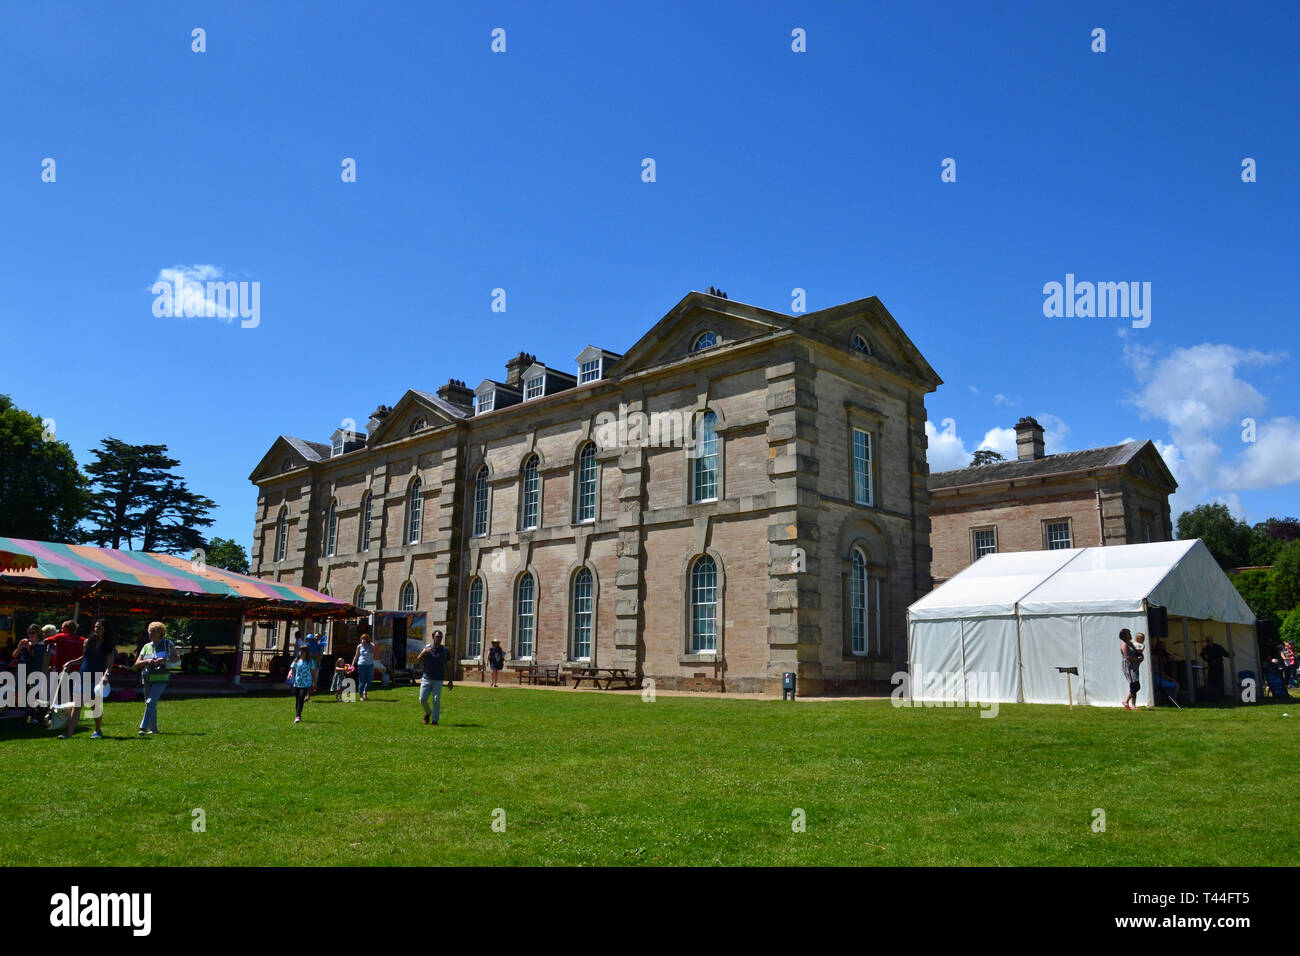 Compton Verney House, Compton Verney, Kineton, Warwickshire, England, UK. 18th century country mansion. Art Gallery with landscaped grounds. Stock Photo